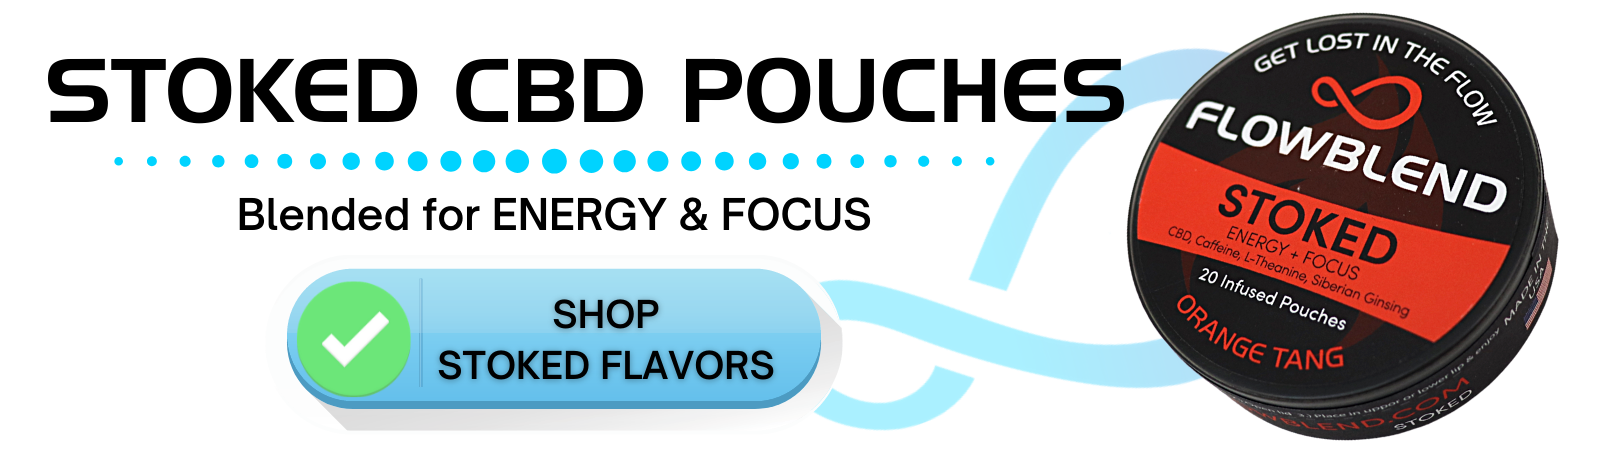 stoked-cbd-pouches.png